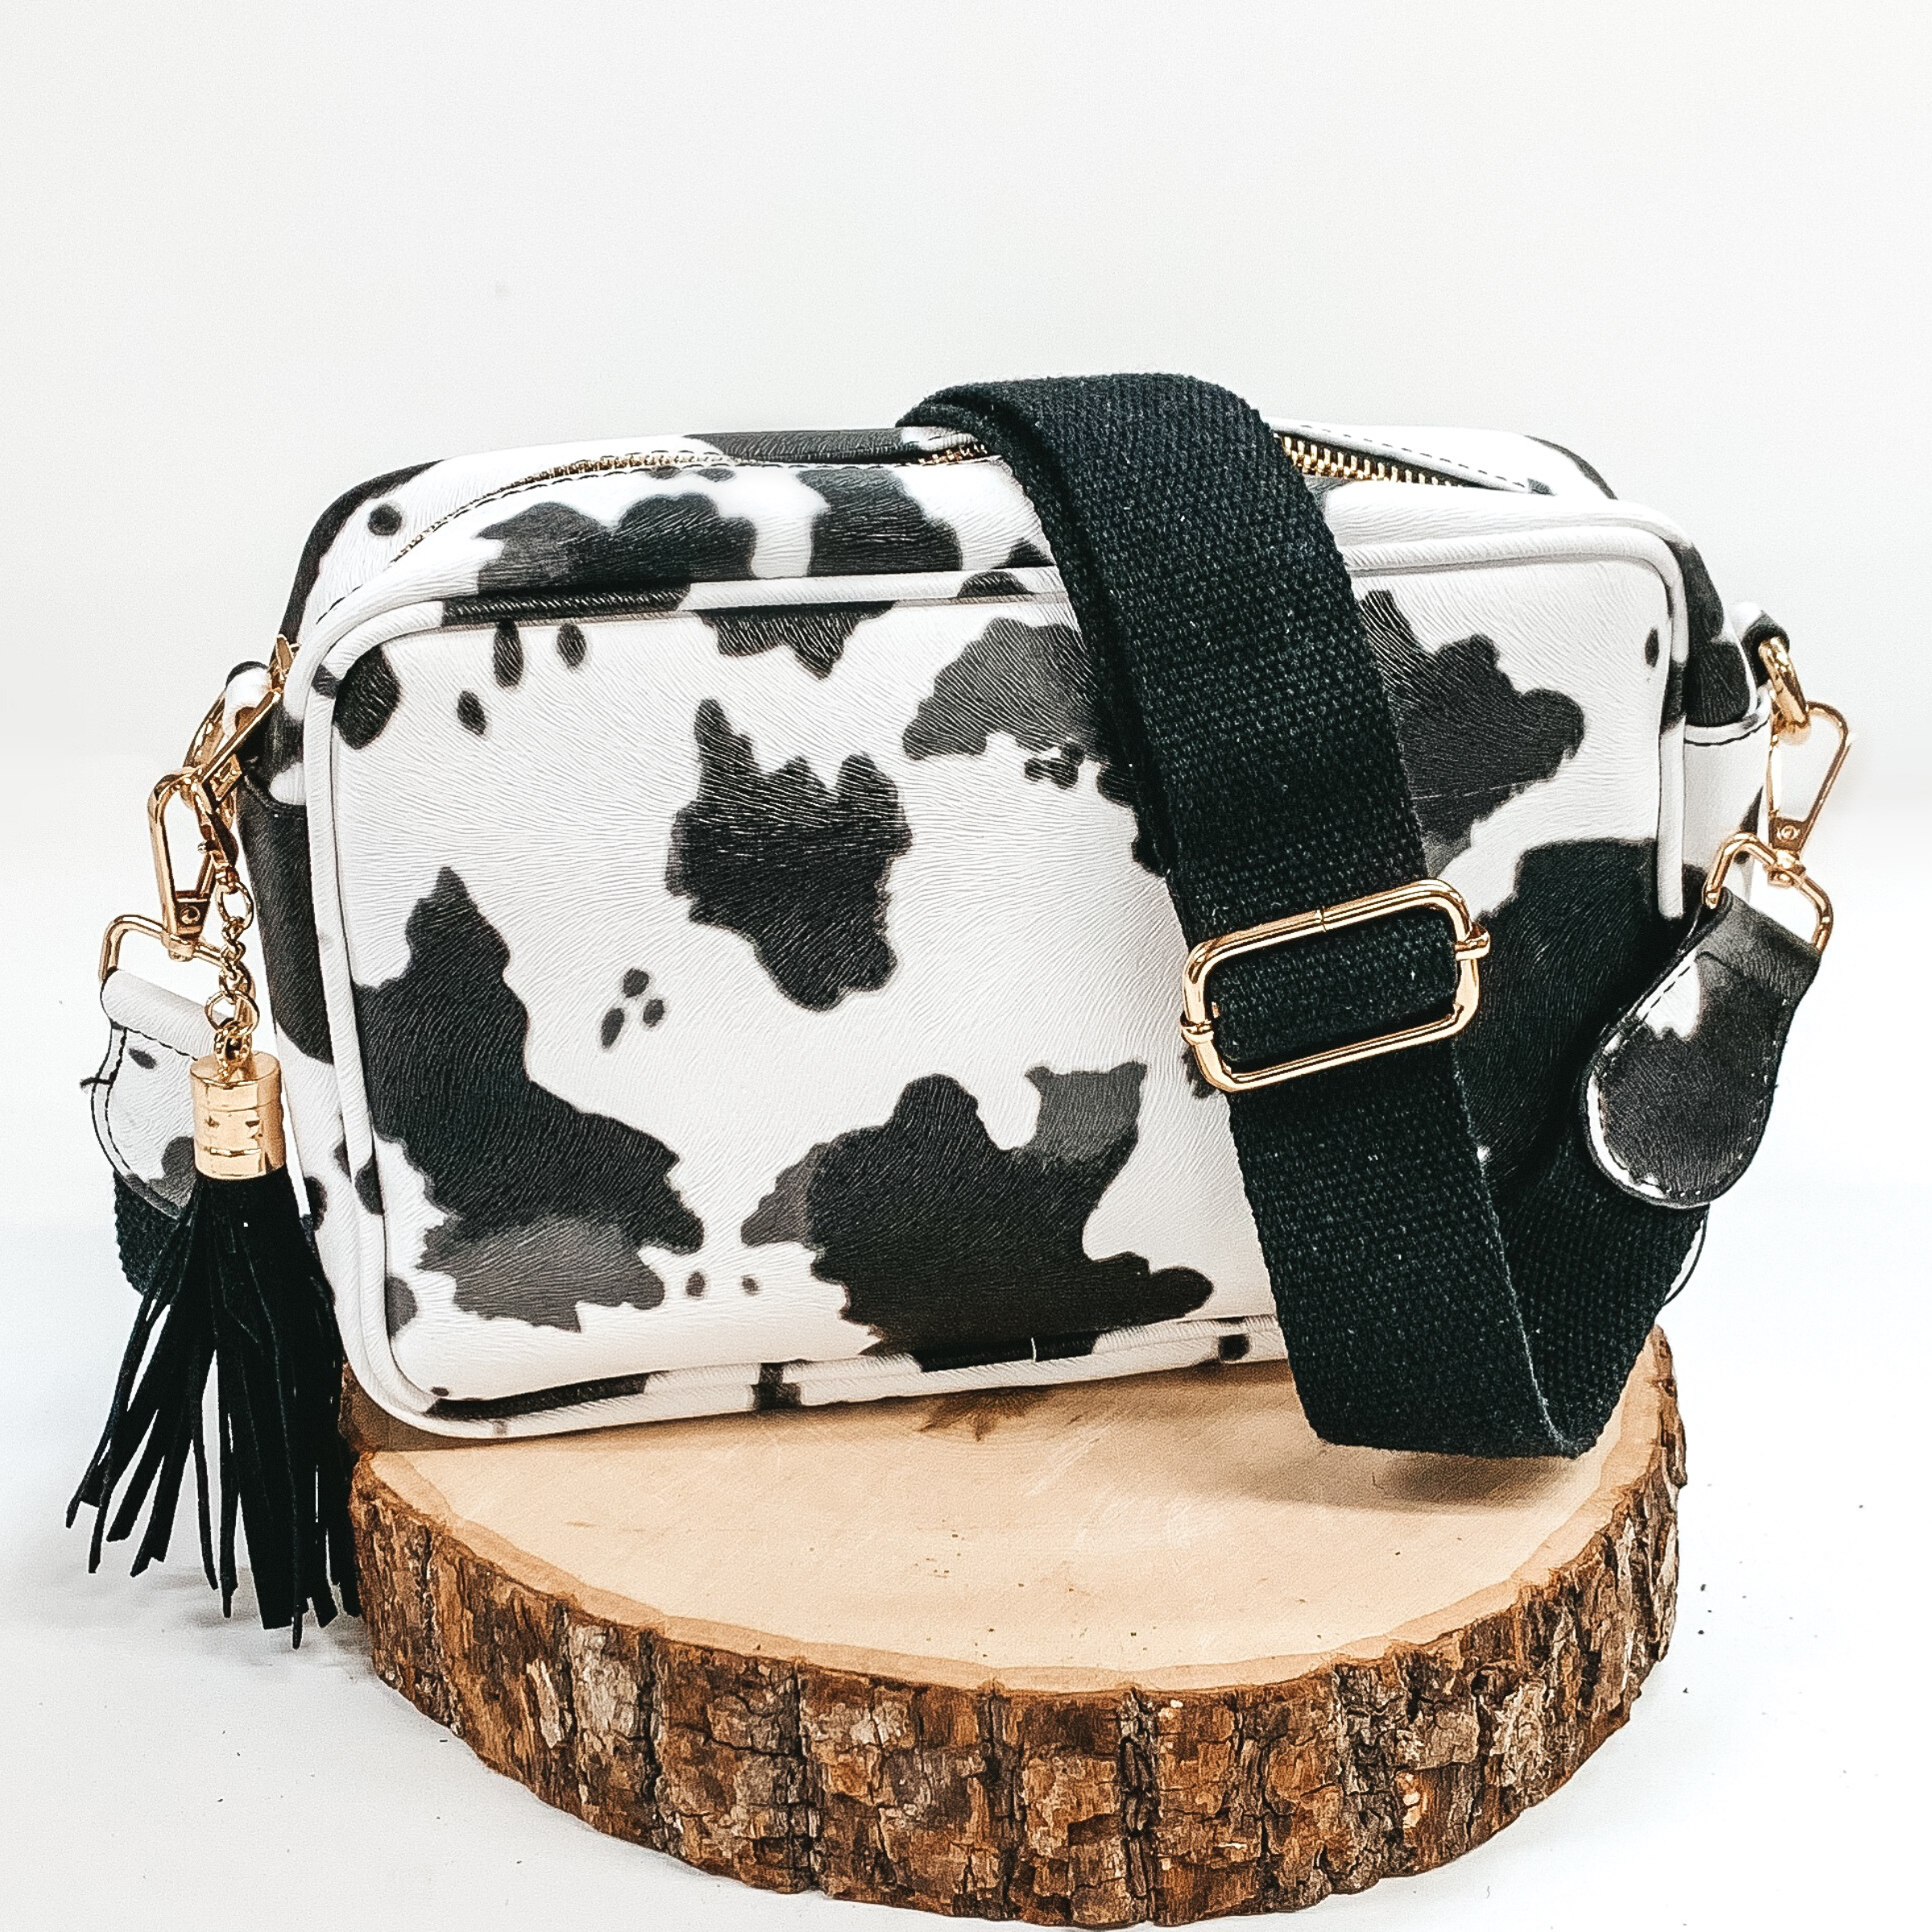 White and black cow print rectangle purse with a black adjustable strap and black decorative tassel. This purse also includes gold accents. This purse is pictured sitting on a piece of wood on a white background.